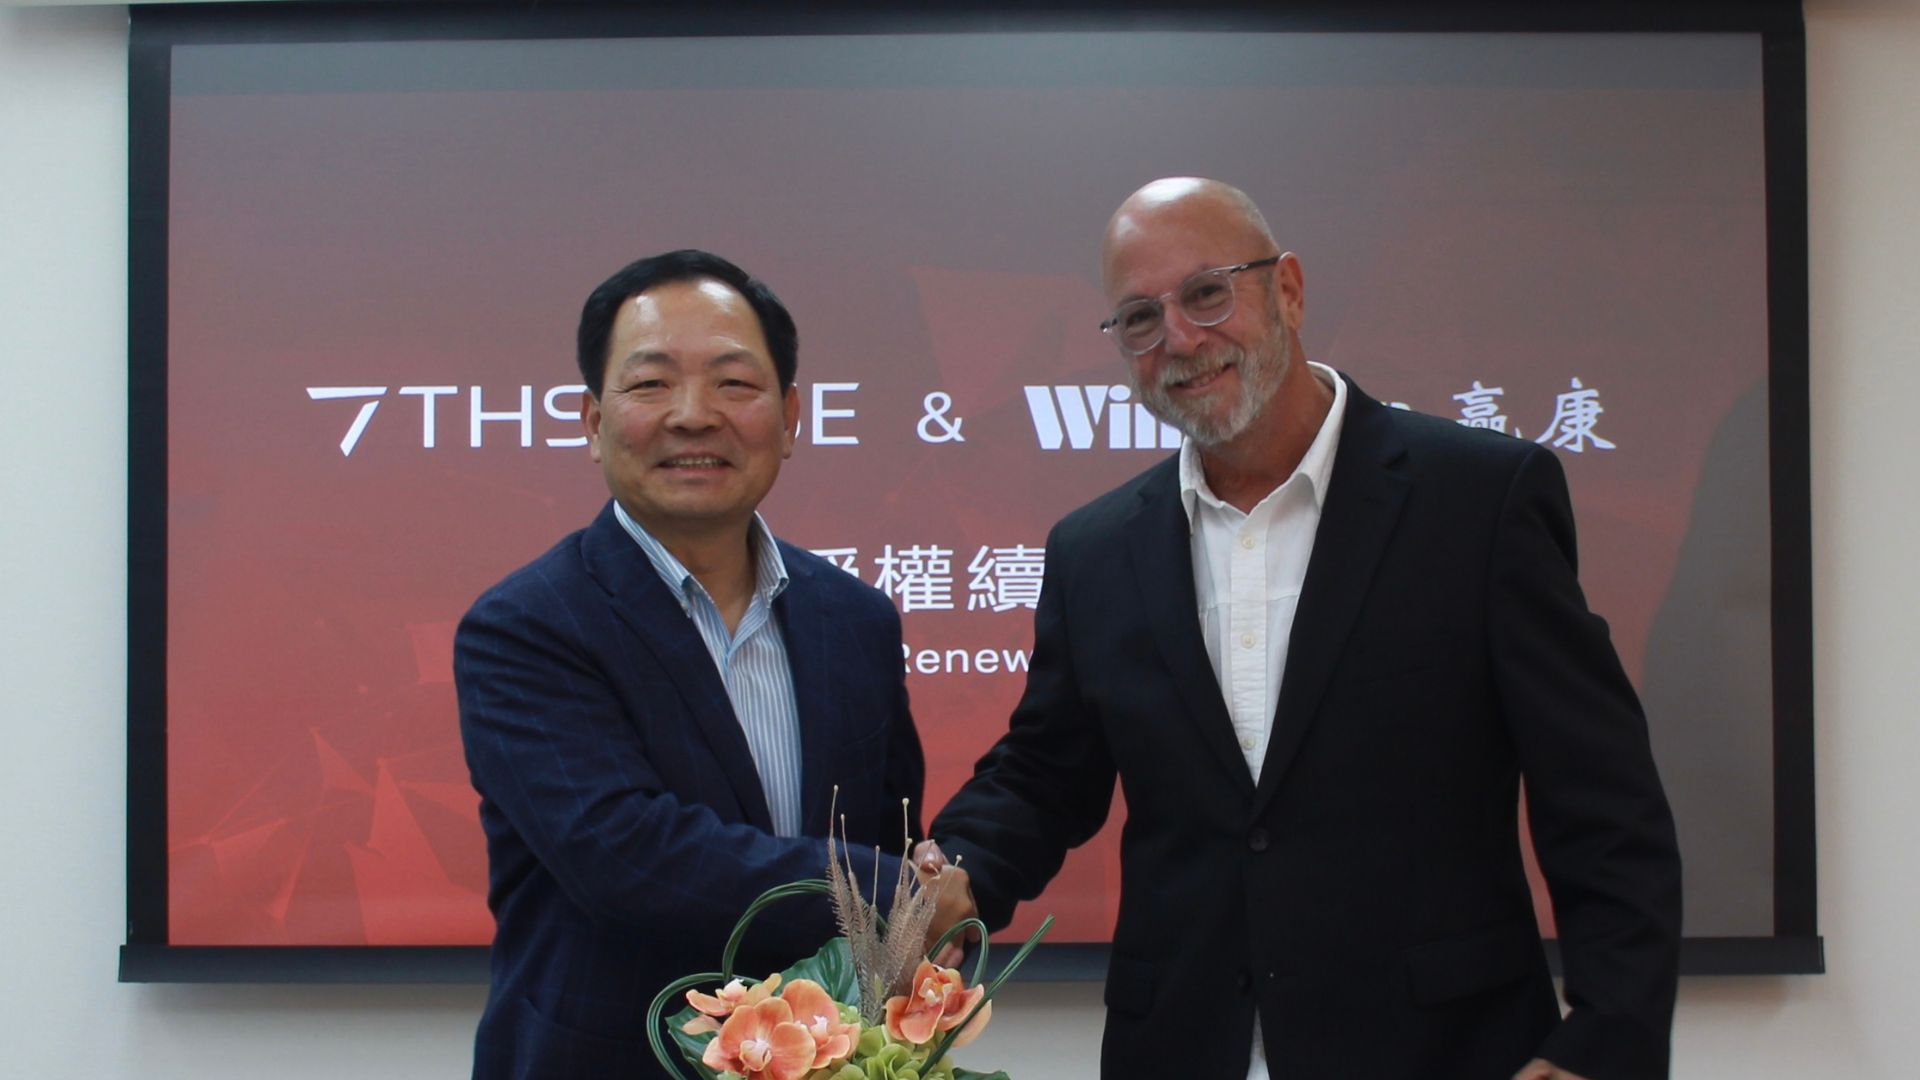 7thSense Renews Distribution Agreement with Chinese Partner Wincomn